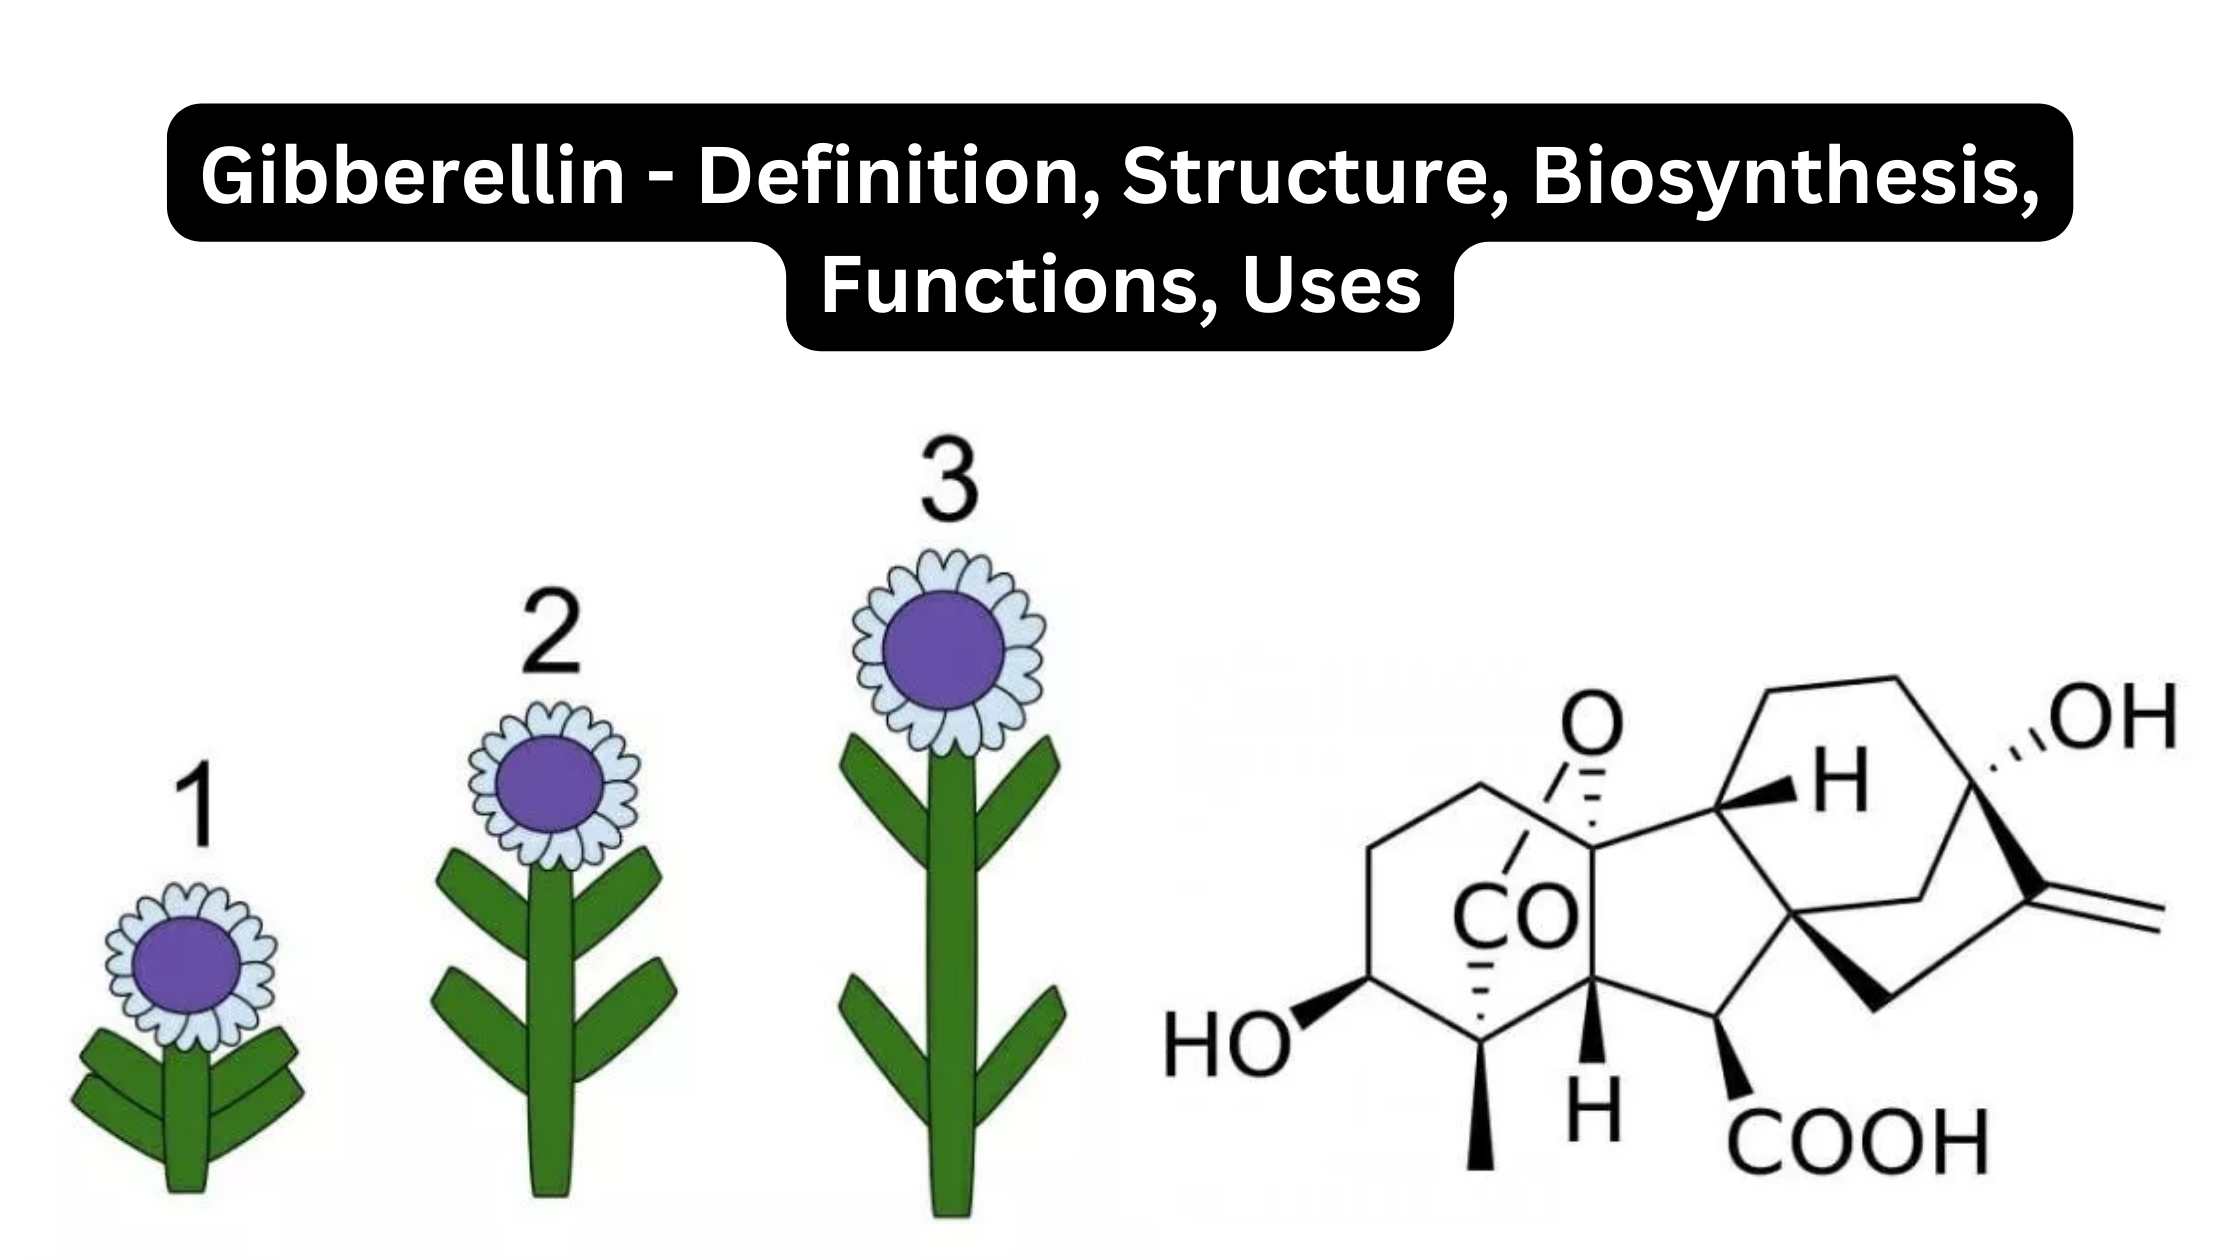 Gibberellin - Definition, Structure, Biosynthesis, Functions, Uses